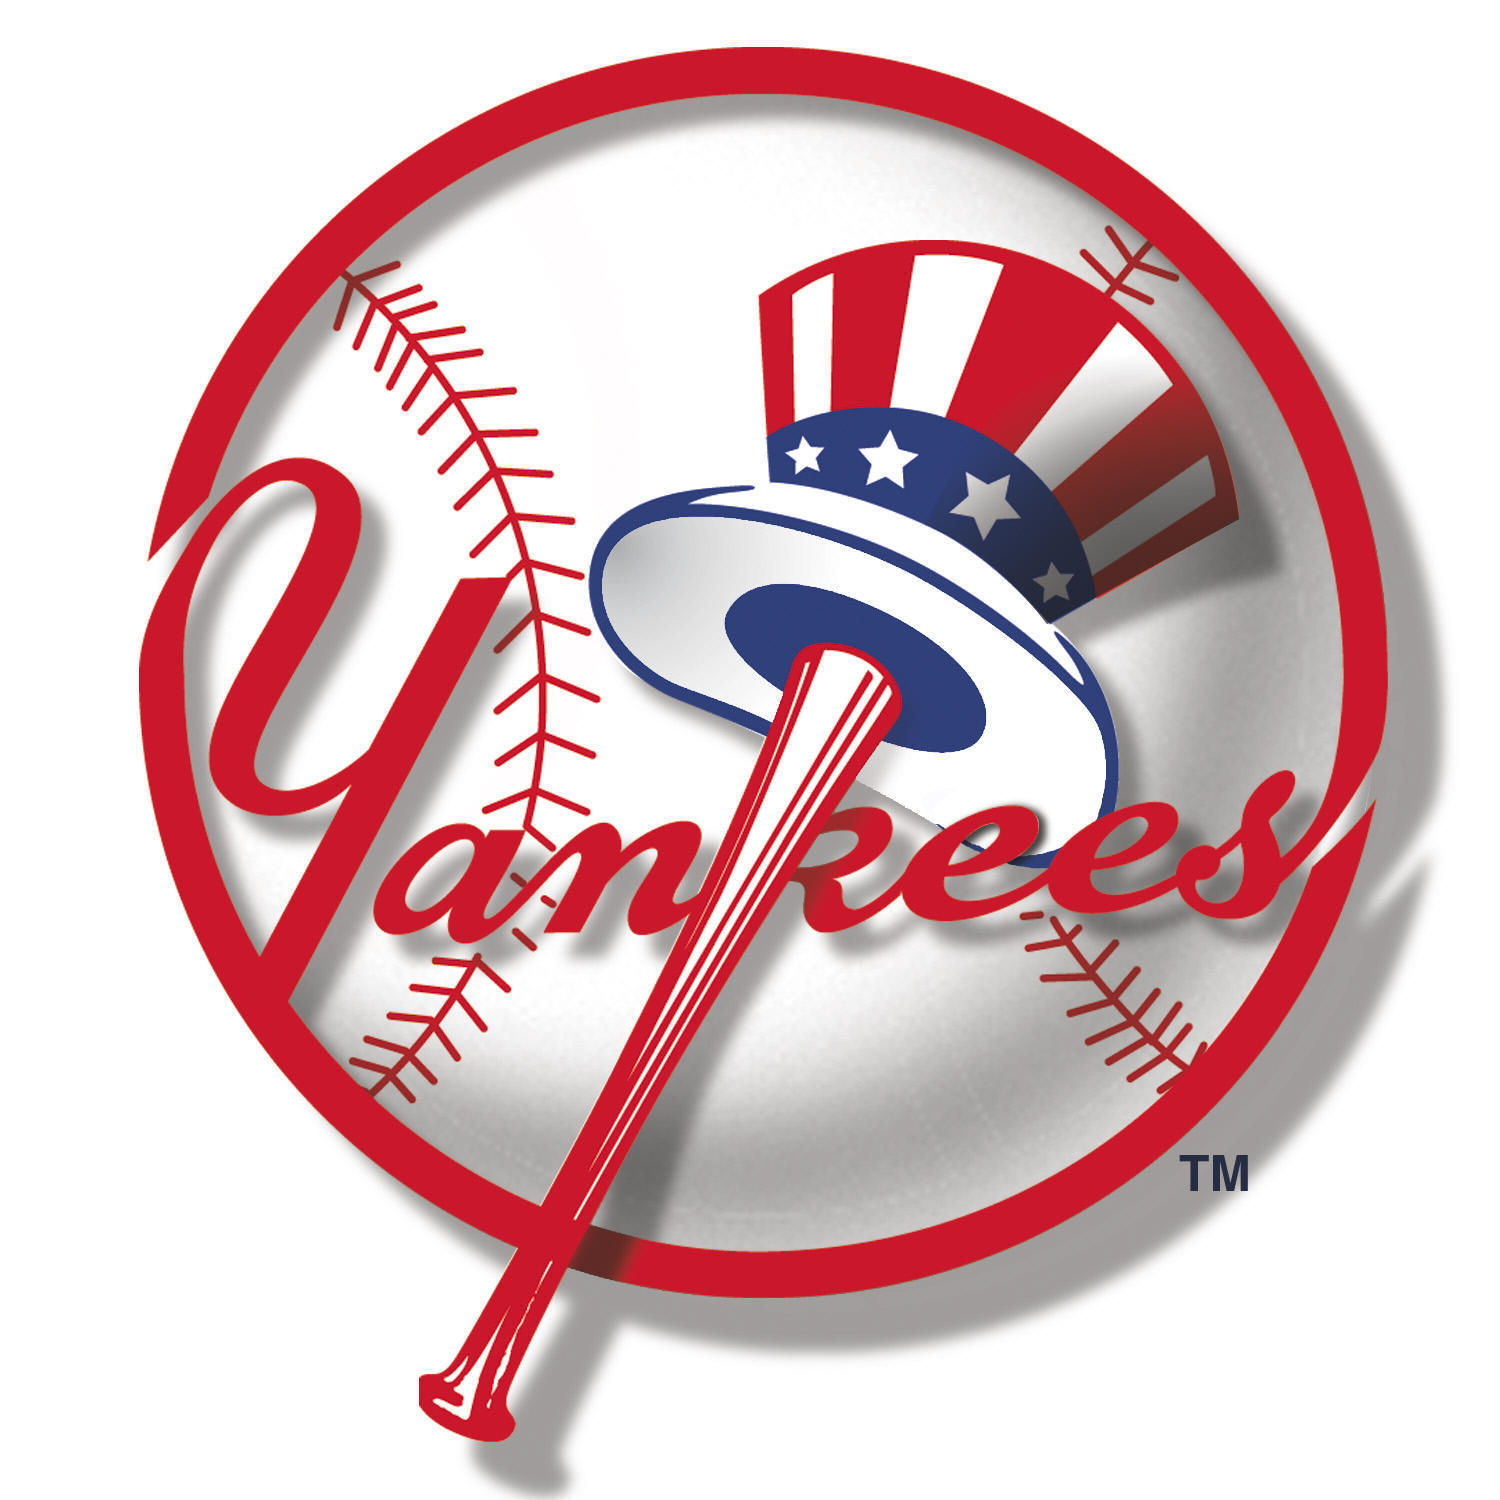 Presale Codes to purchase tickets for New York Yankees 2018 Postseason games